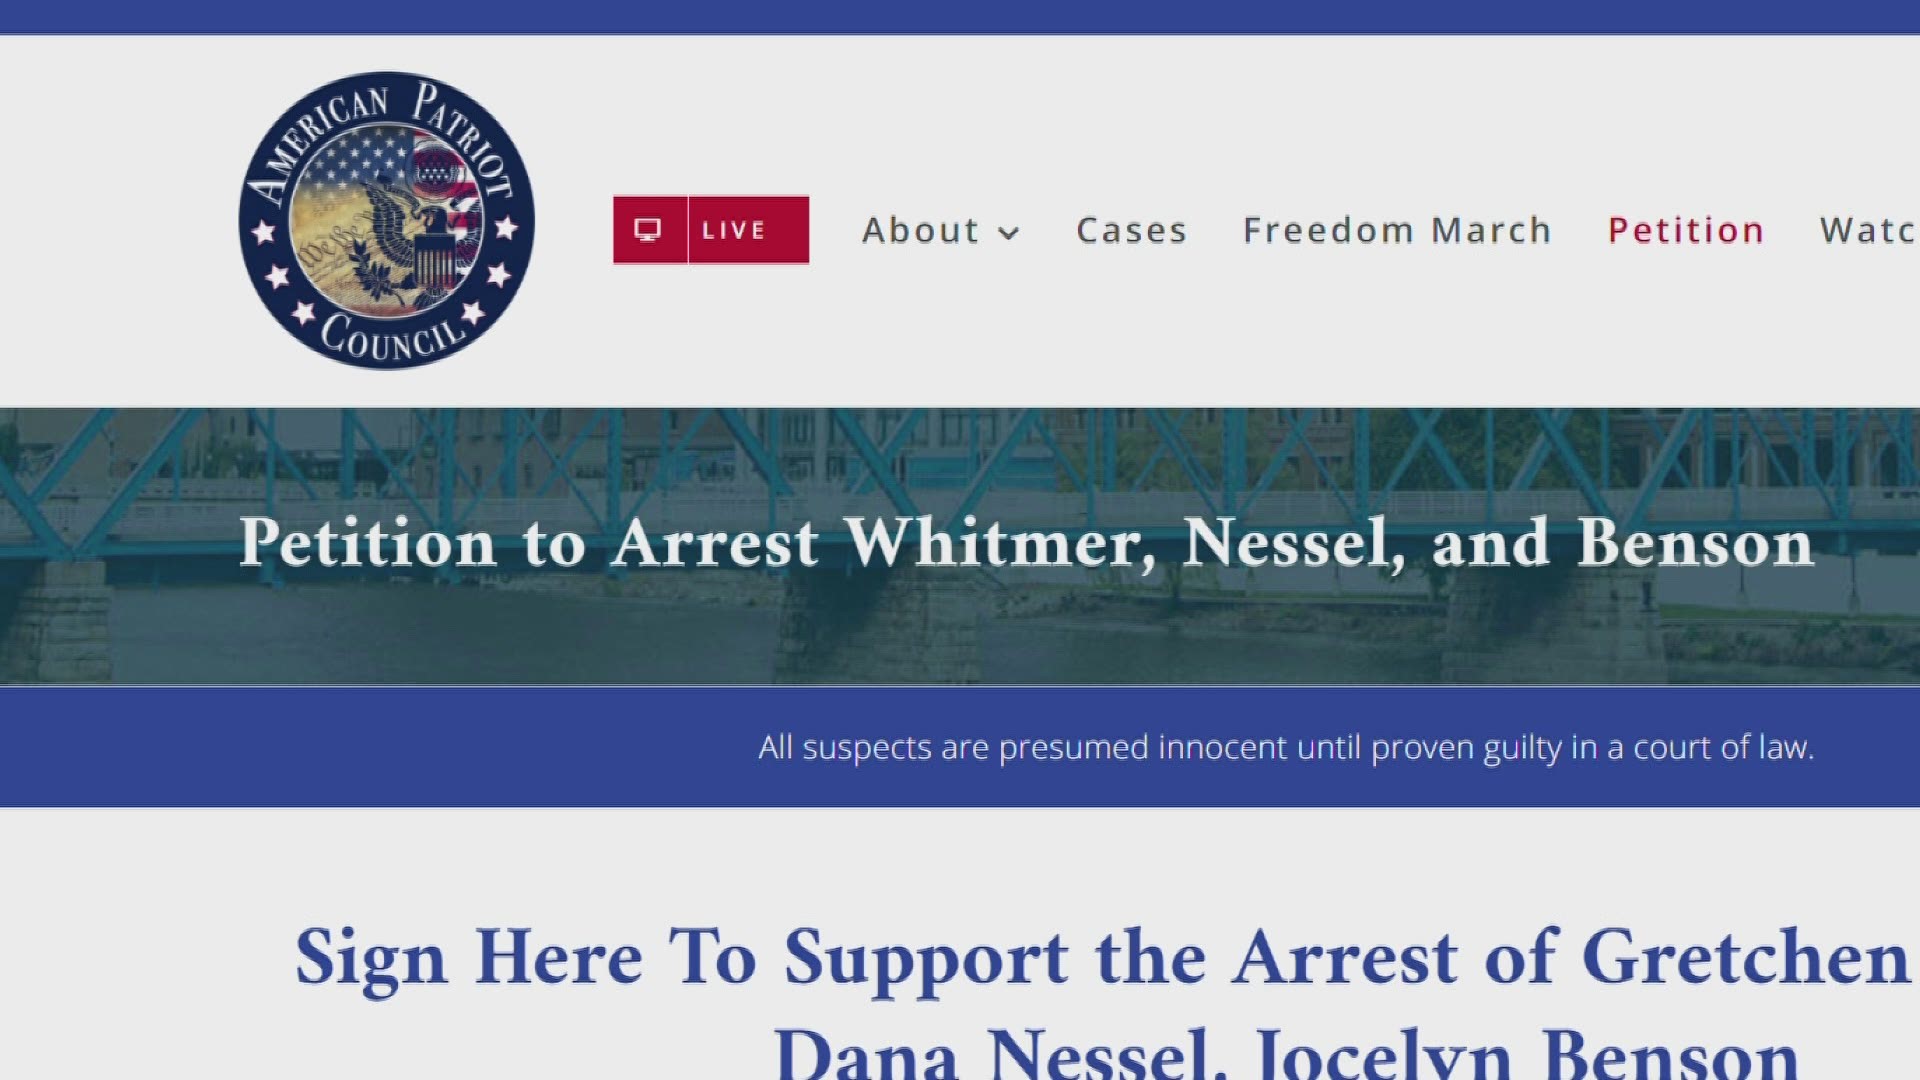 The American Patriot Council is an organization that is advocating for the arrest of several governors - alleging that they have violated the Constitution.